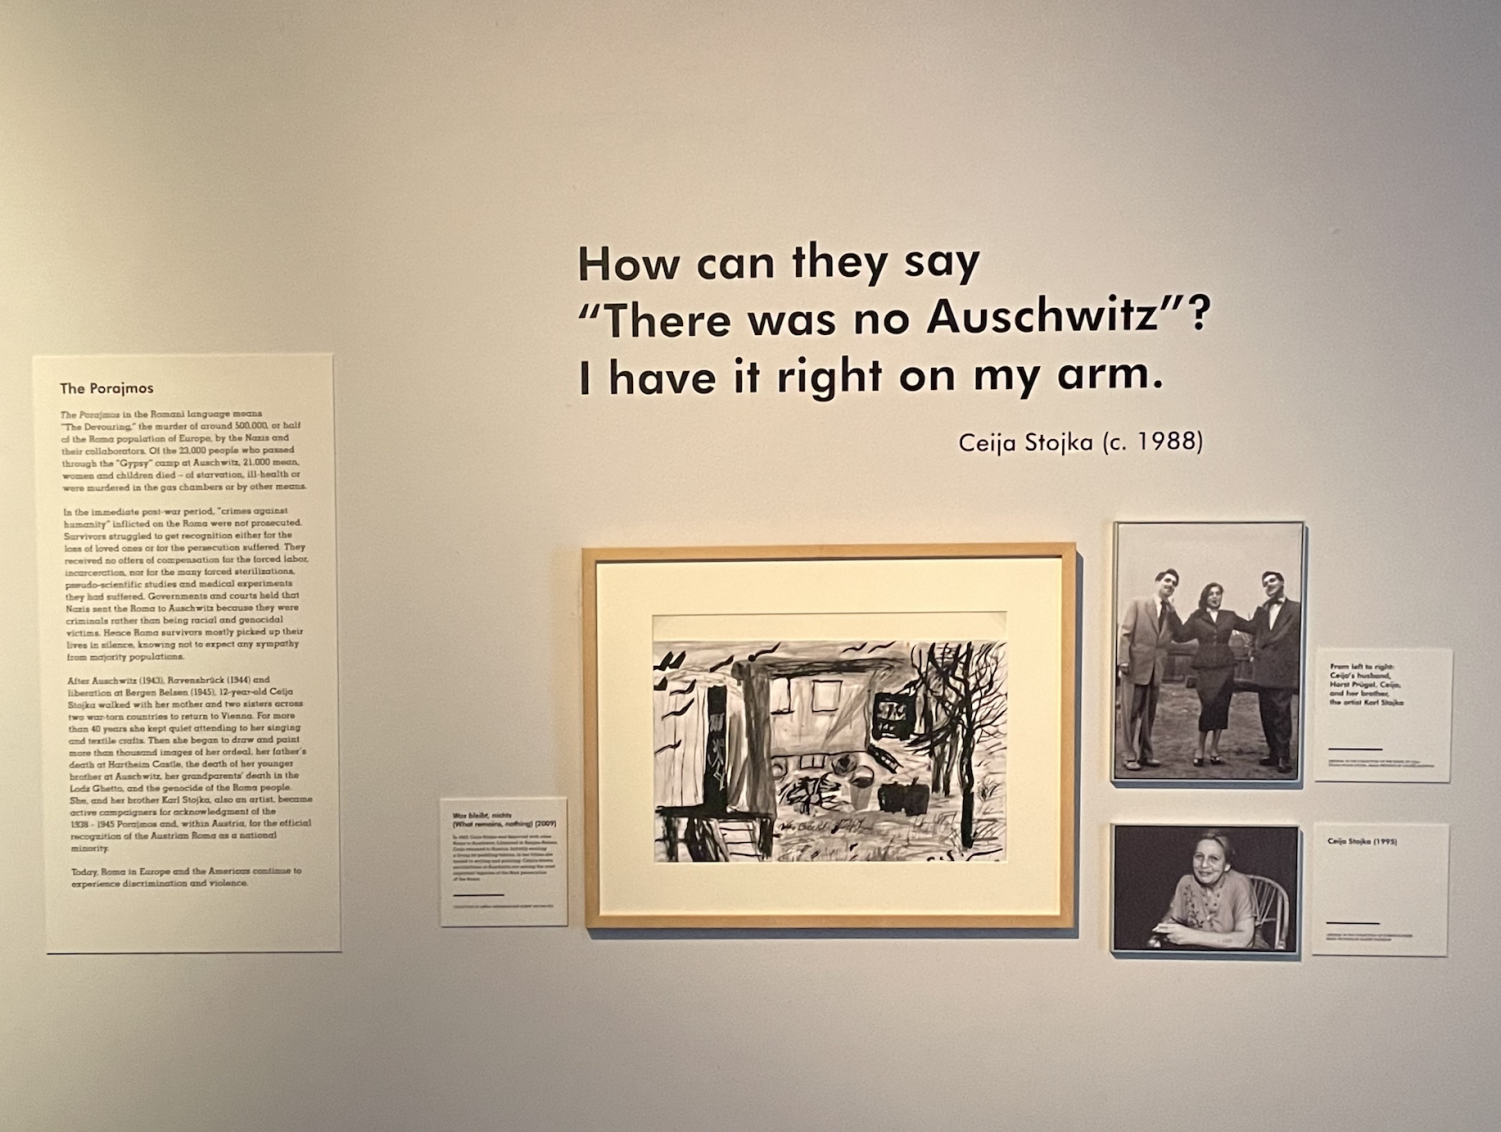 Quotes, images, stories, and history from Holocaust survivors adorn the Auschwitz exhibit